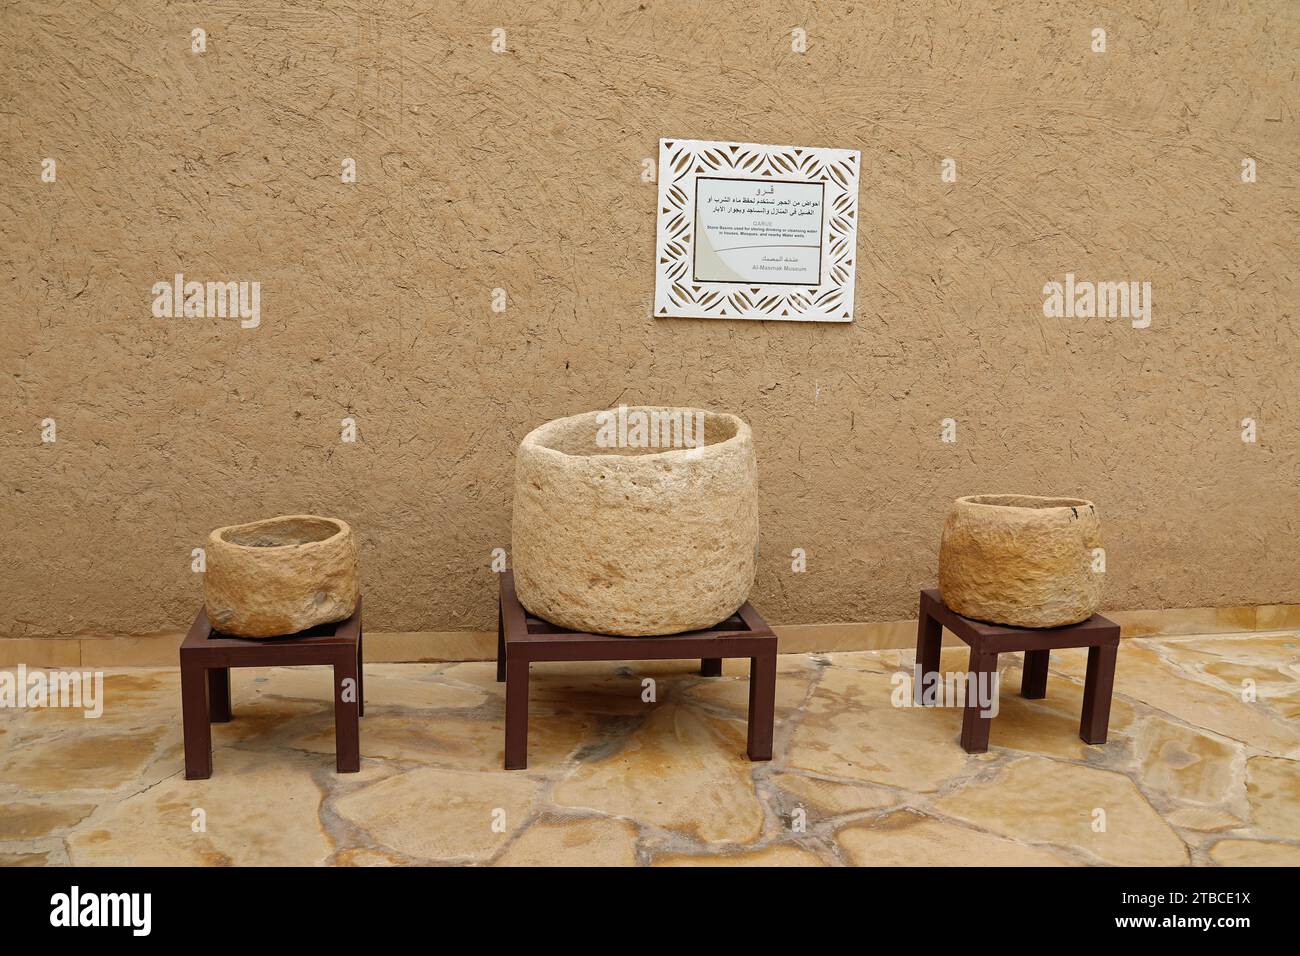 Old stone basins used for storing water on display at Masmak Fort Museum in Riyadh Stock Photo